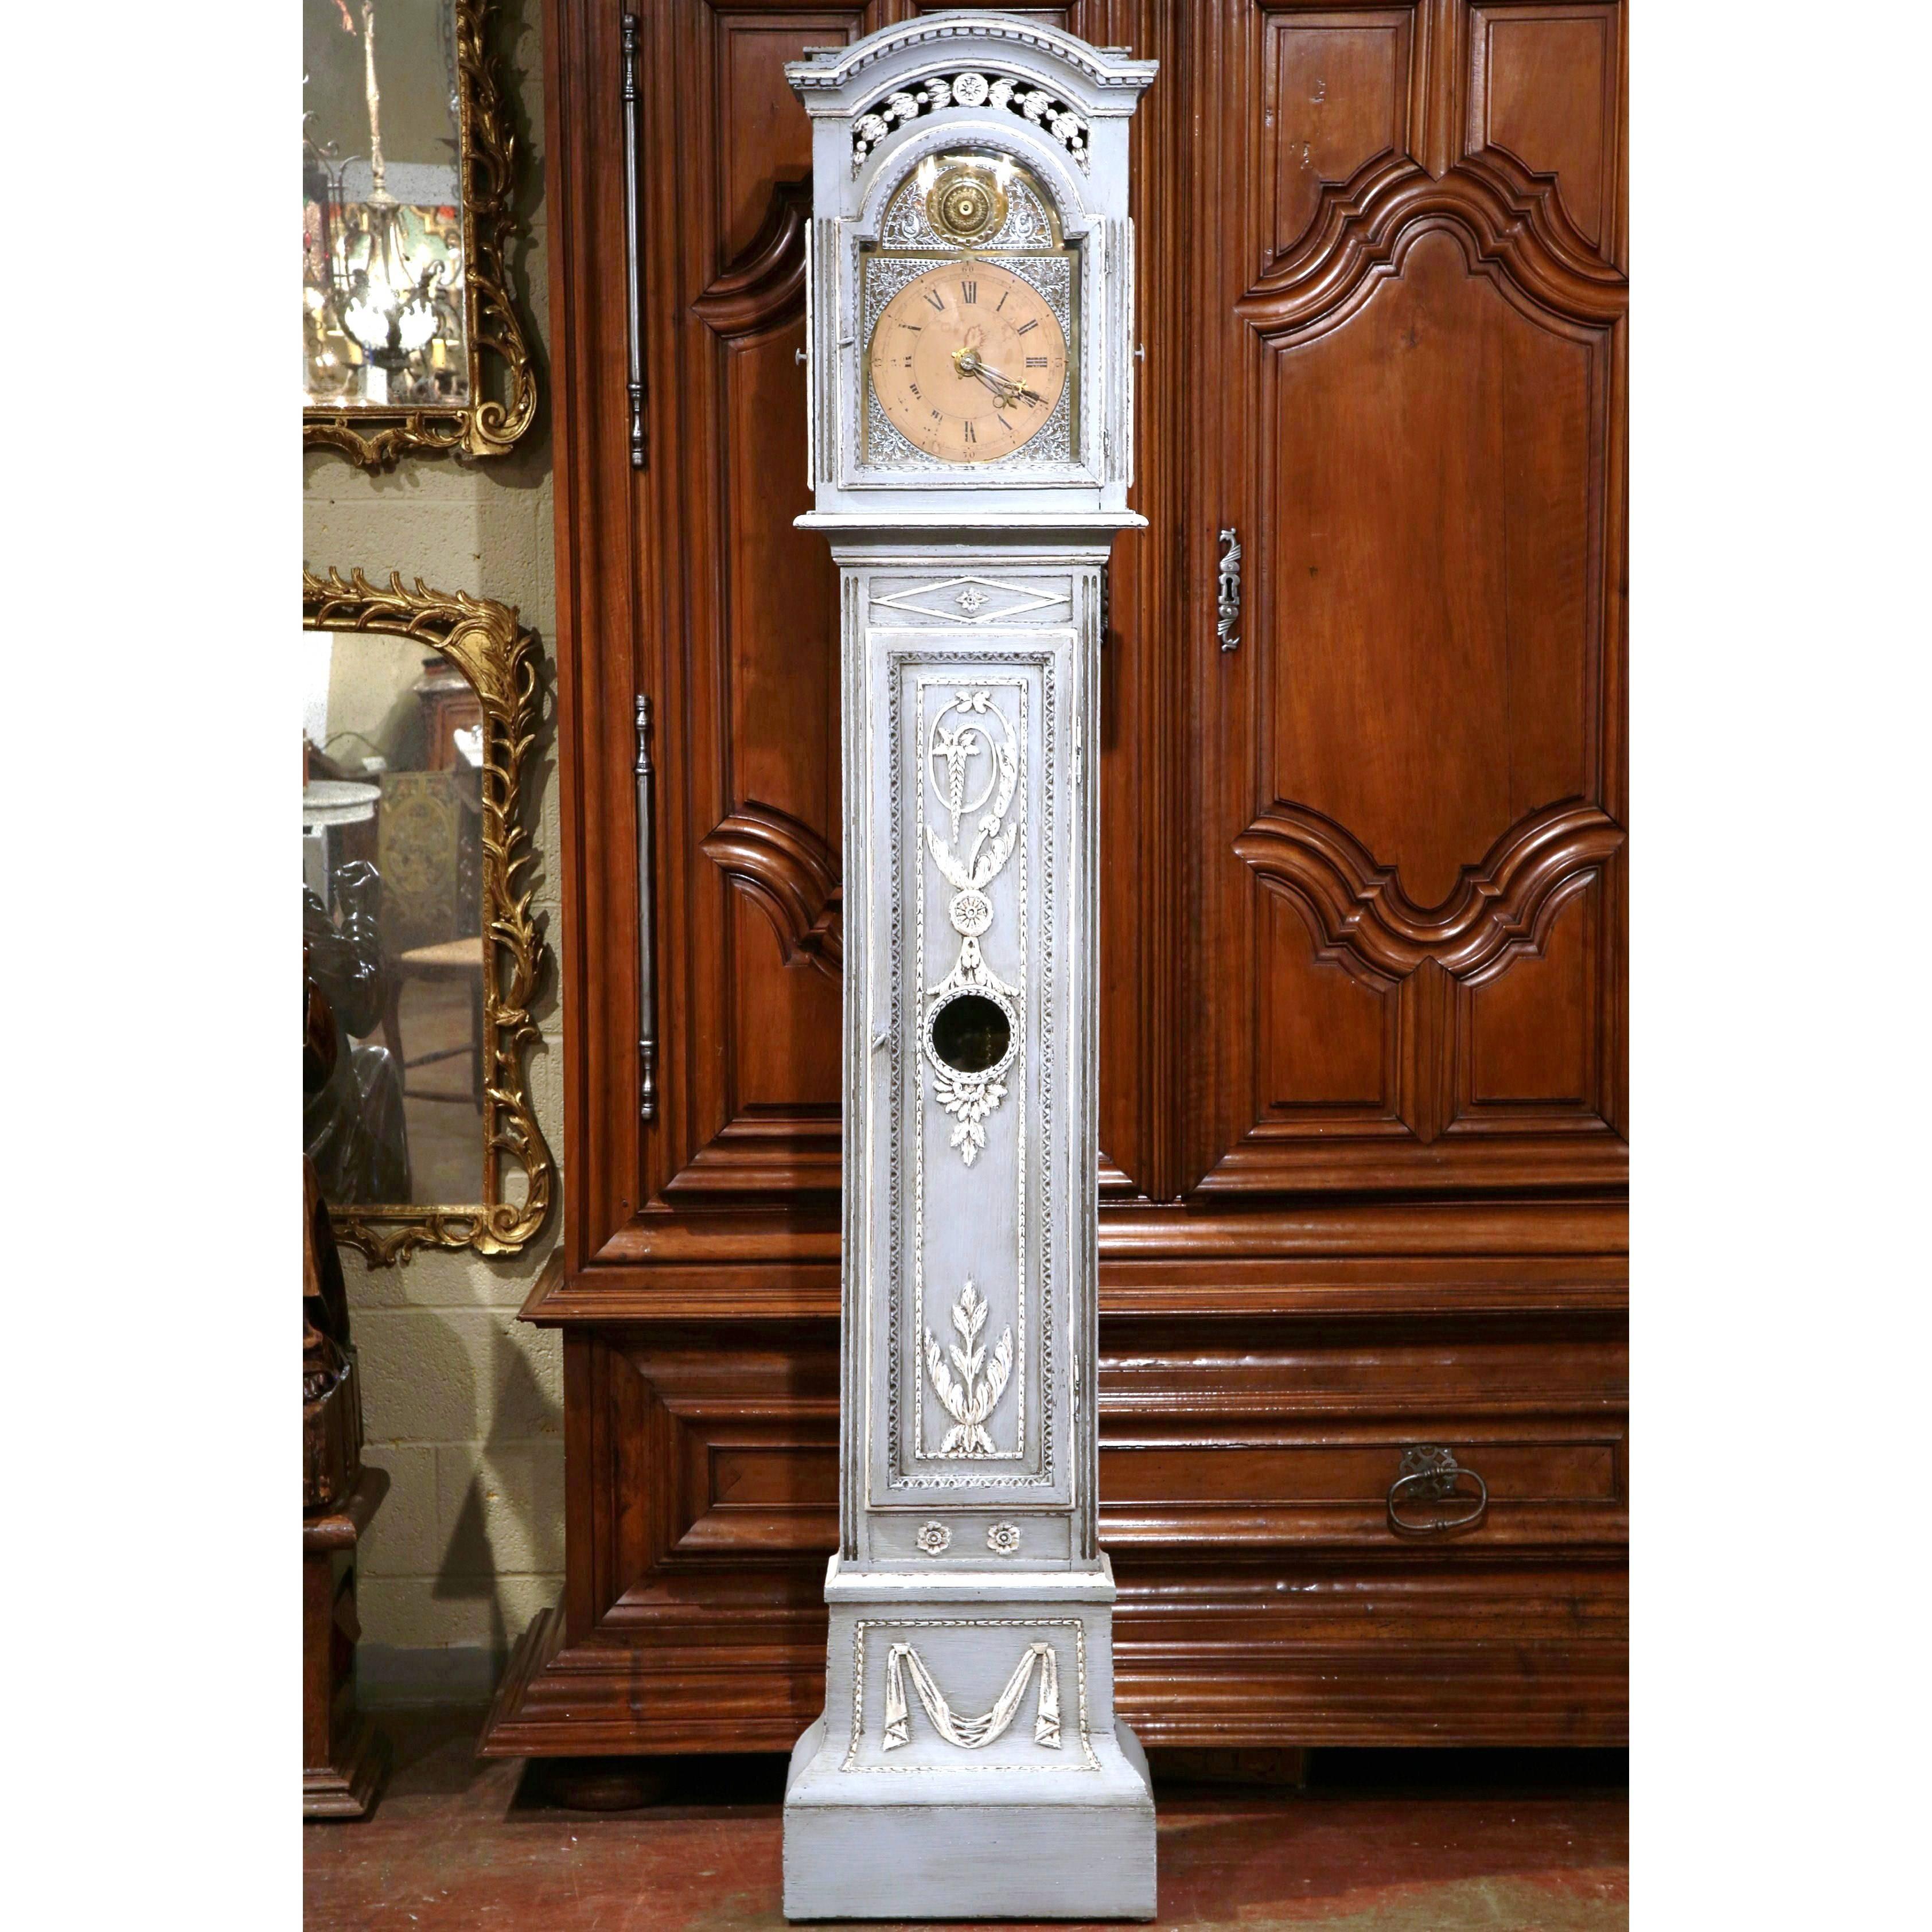 Crafted in northern France, circa 1800, this elegant tall case clock features a carved and pierced bonnet top decorated with intricate carvings. The long front door features floral and leaf decor, and the bottom is embellished with swag motifs. The